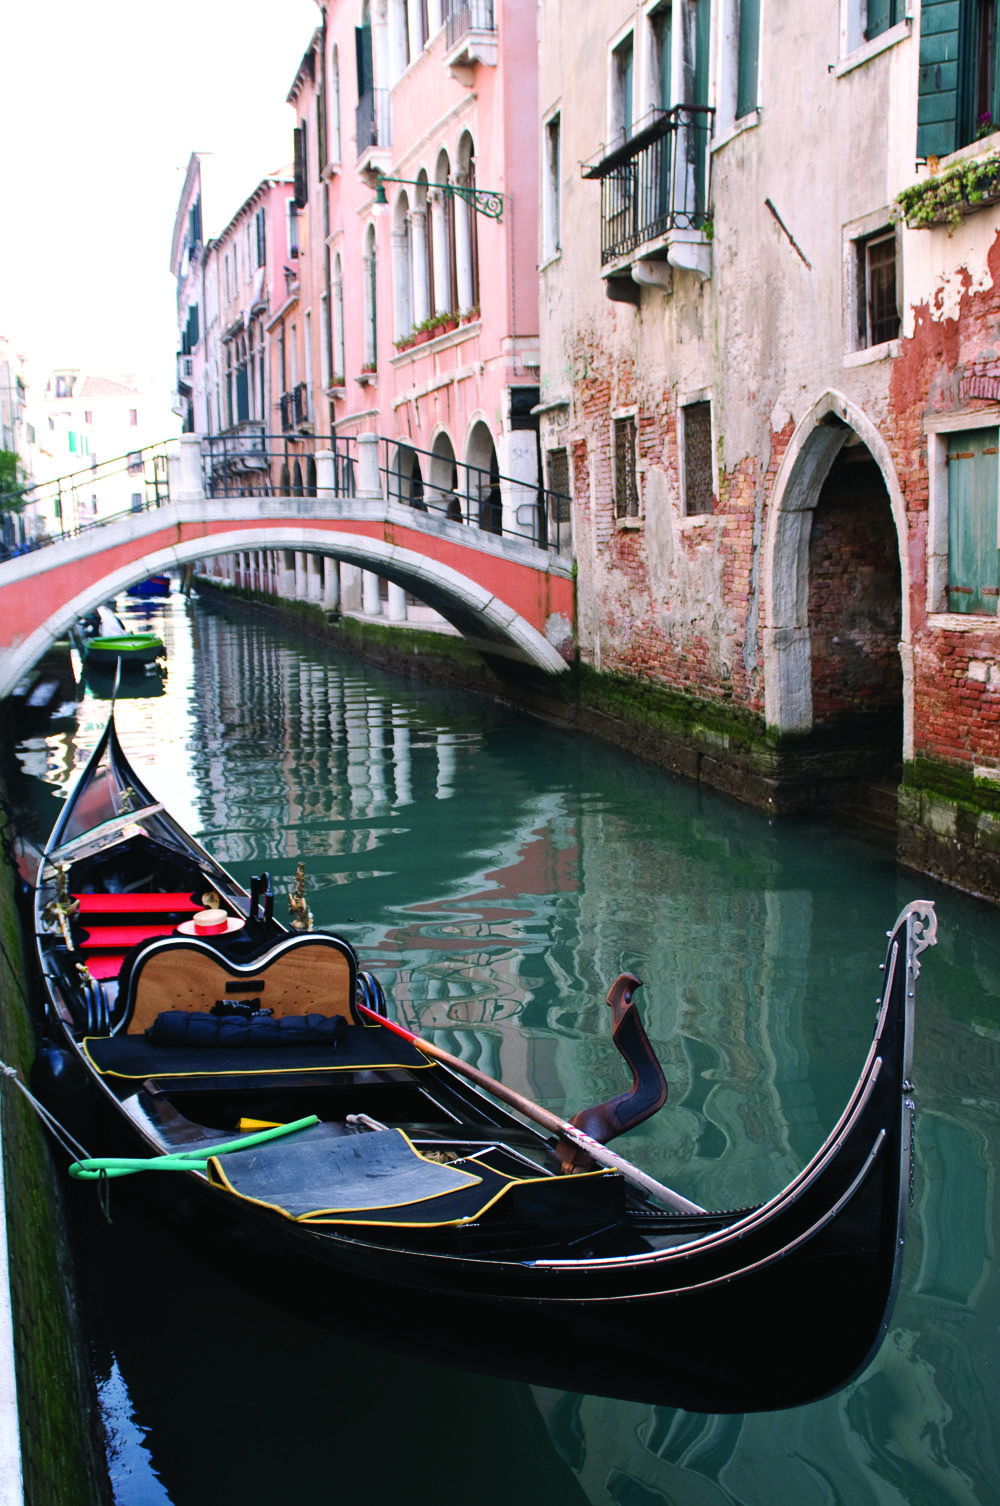 A gondola "parked" along a small canal in Venice